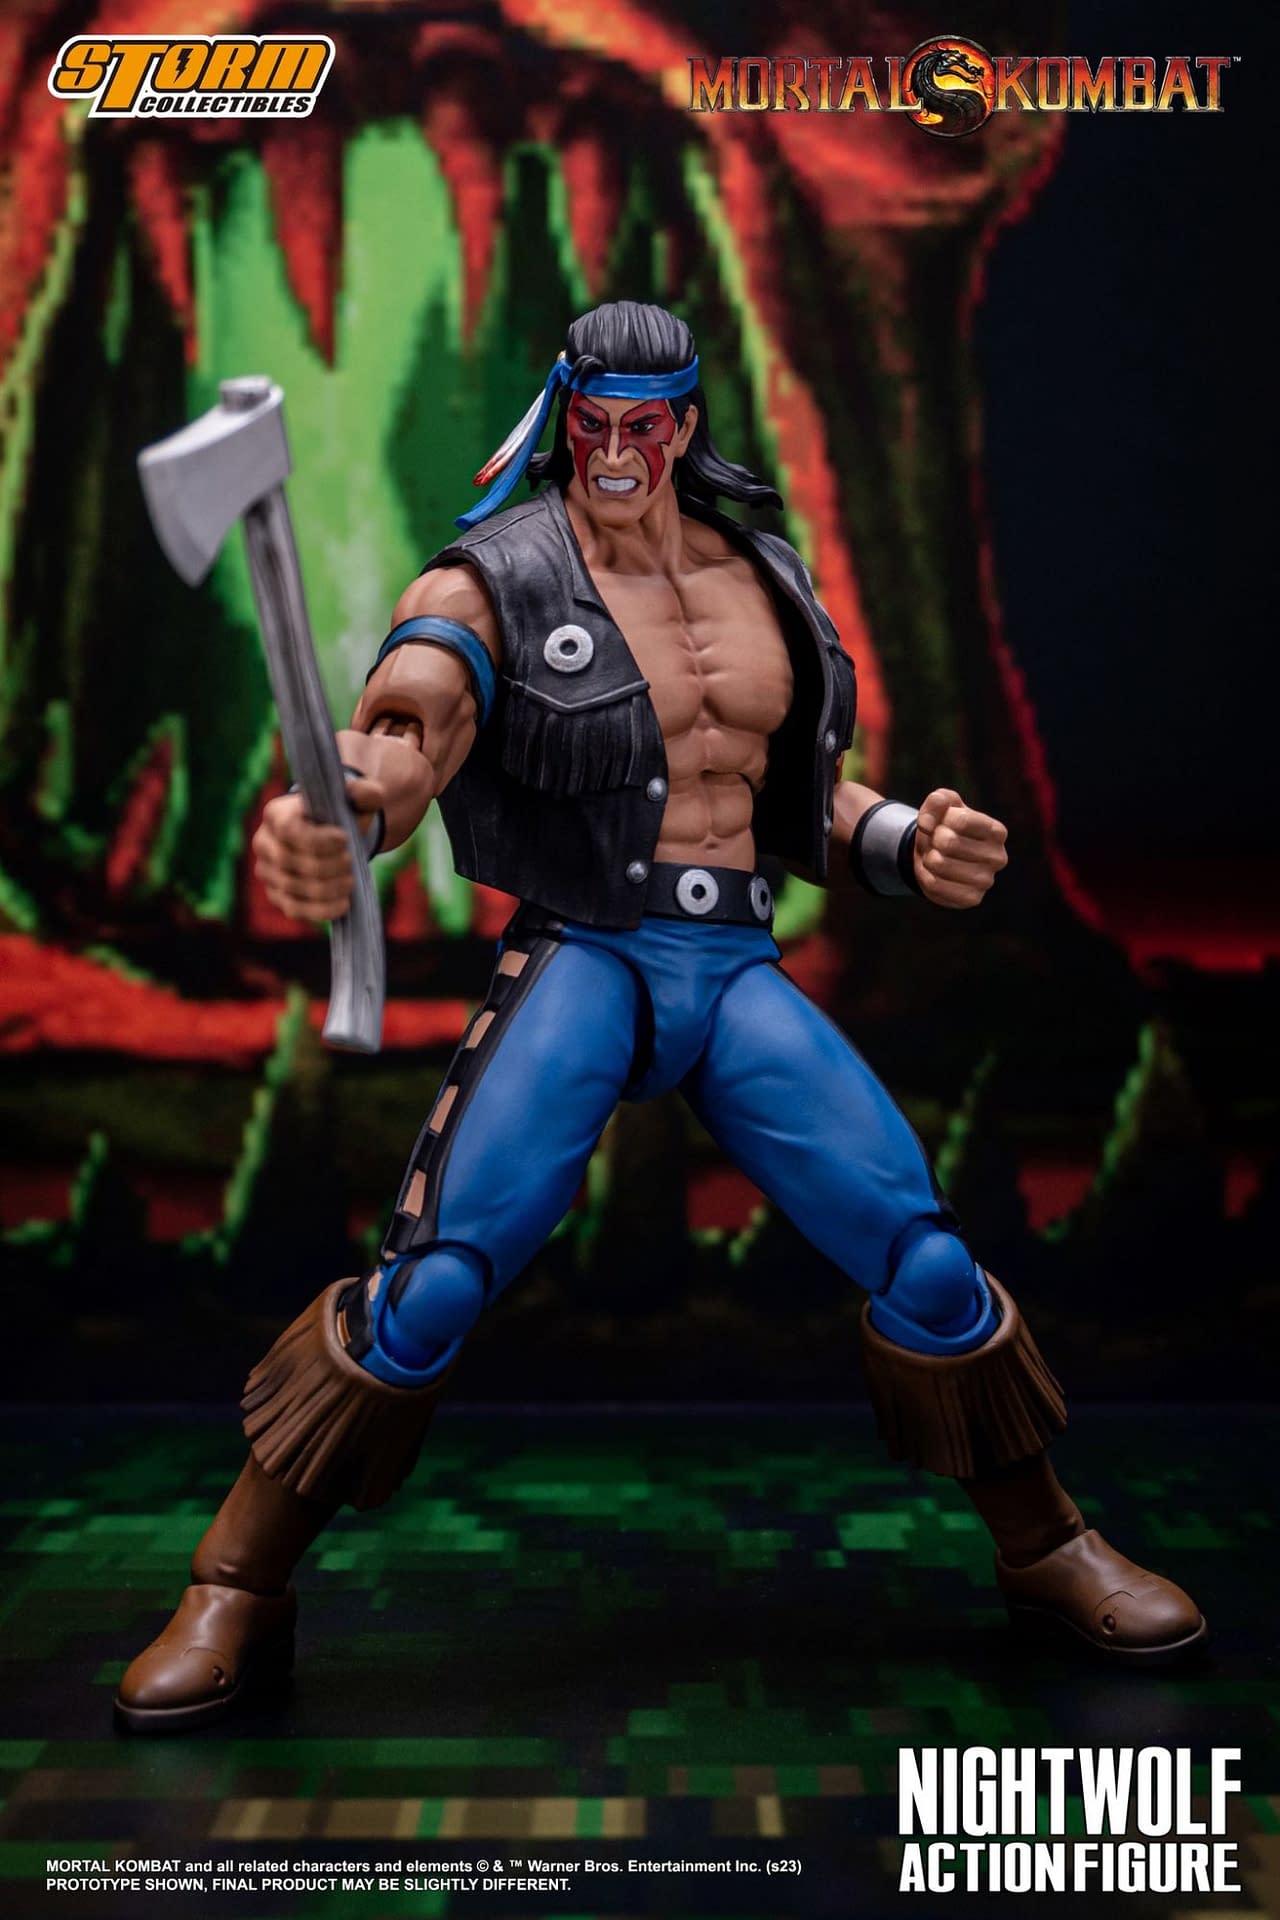 Storm Collectibles Unleashes the Fury of Mortal Kombat's Nightwolf